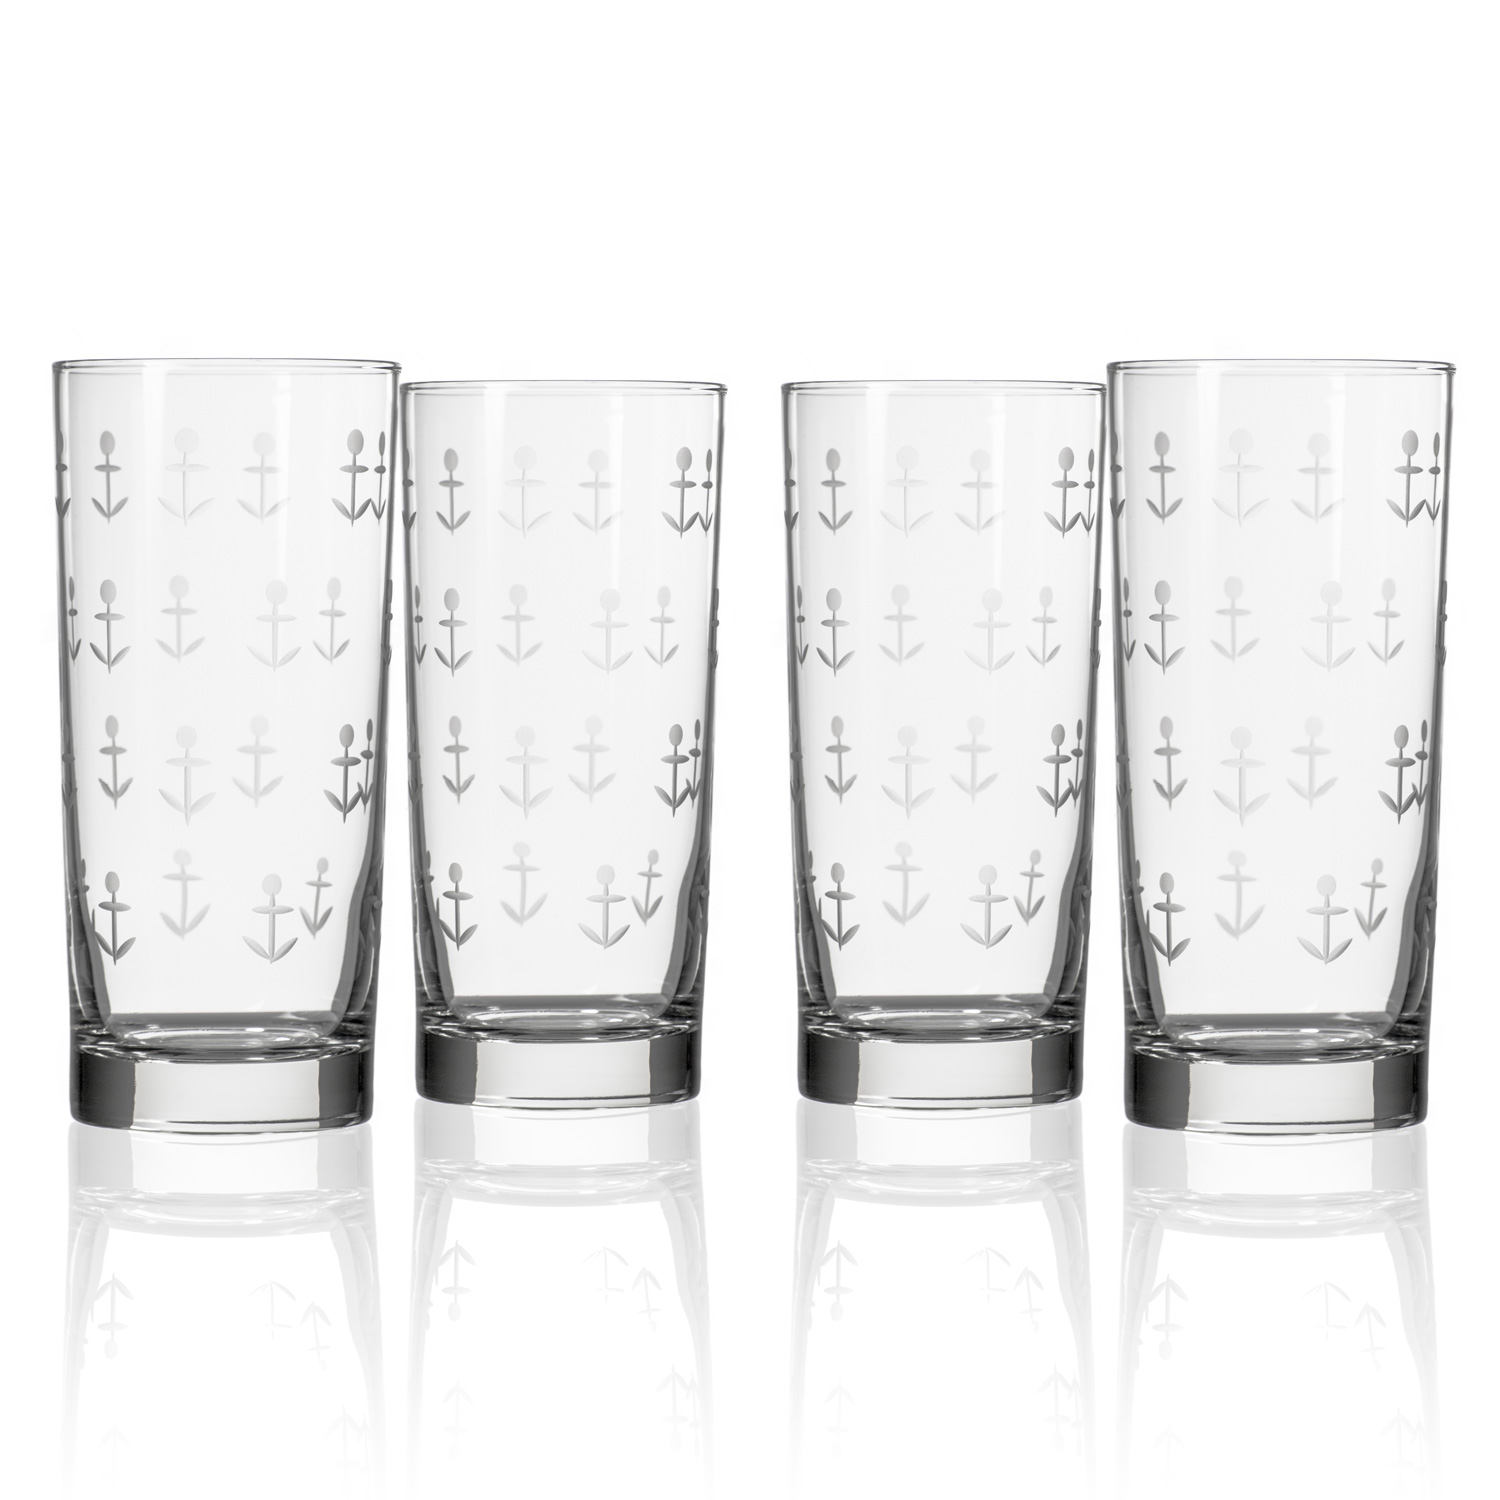 Anchors Aweigh Cooler Glasses